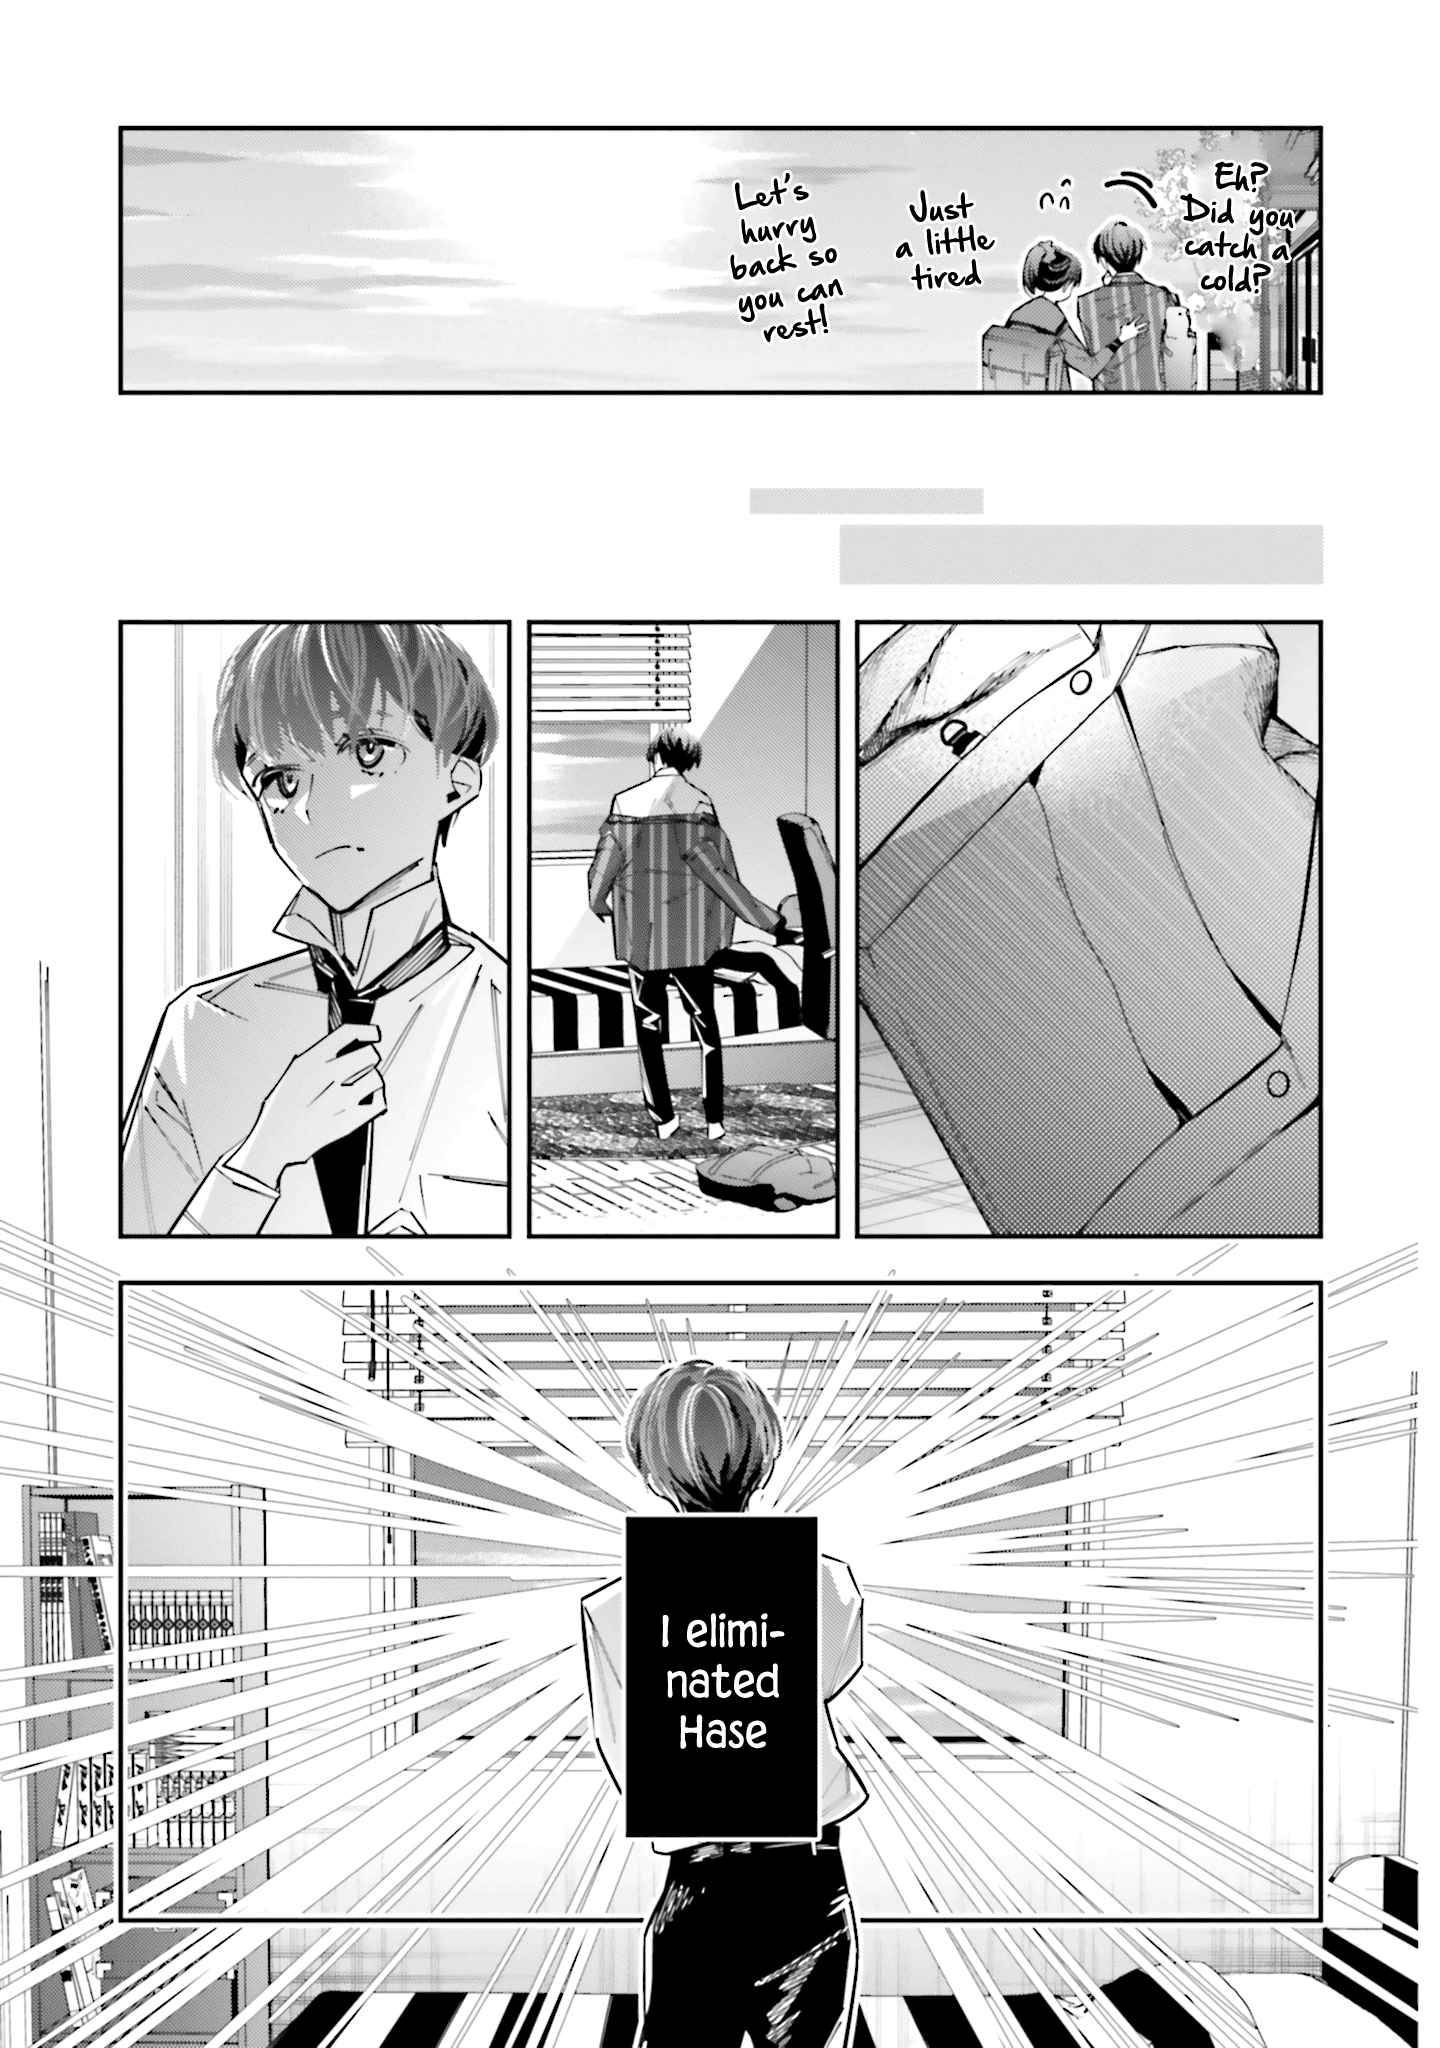 I Reincarnated As The Little Sister Of A Death Game Manga’S Murd3R Mastermind And Failed - chapter 11 - #5